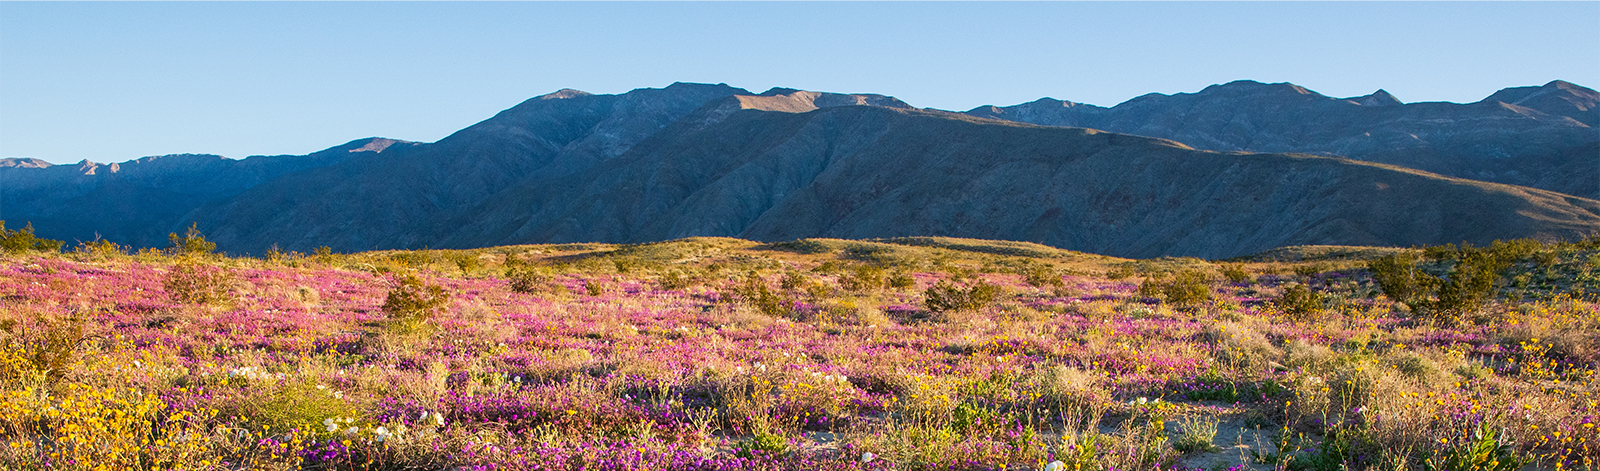 Wildflowers blooming at Anza-Borrego Desert State Park